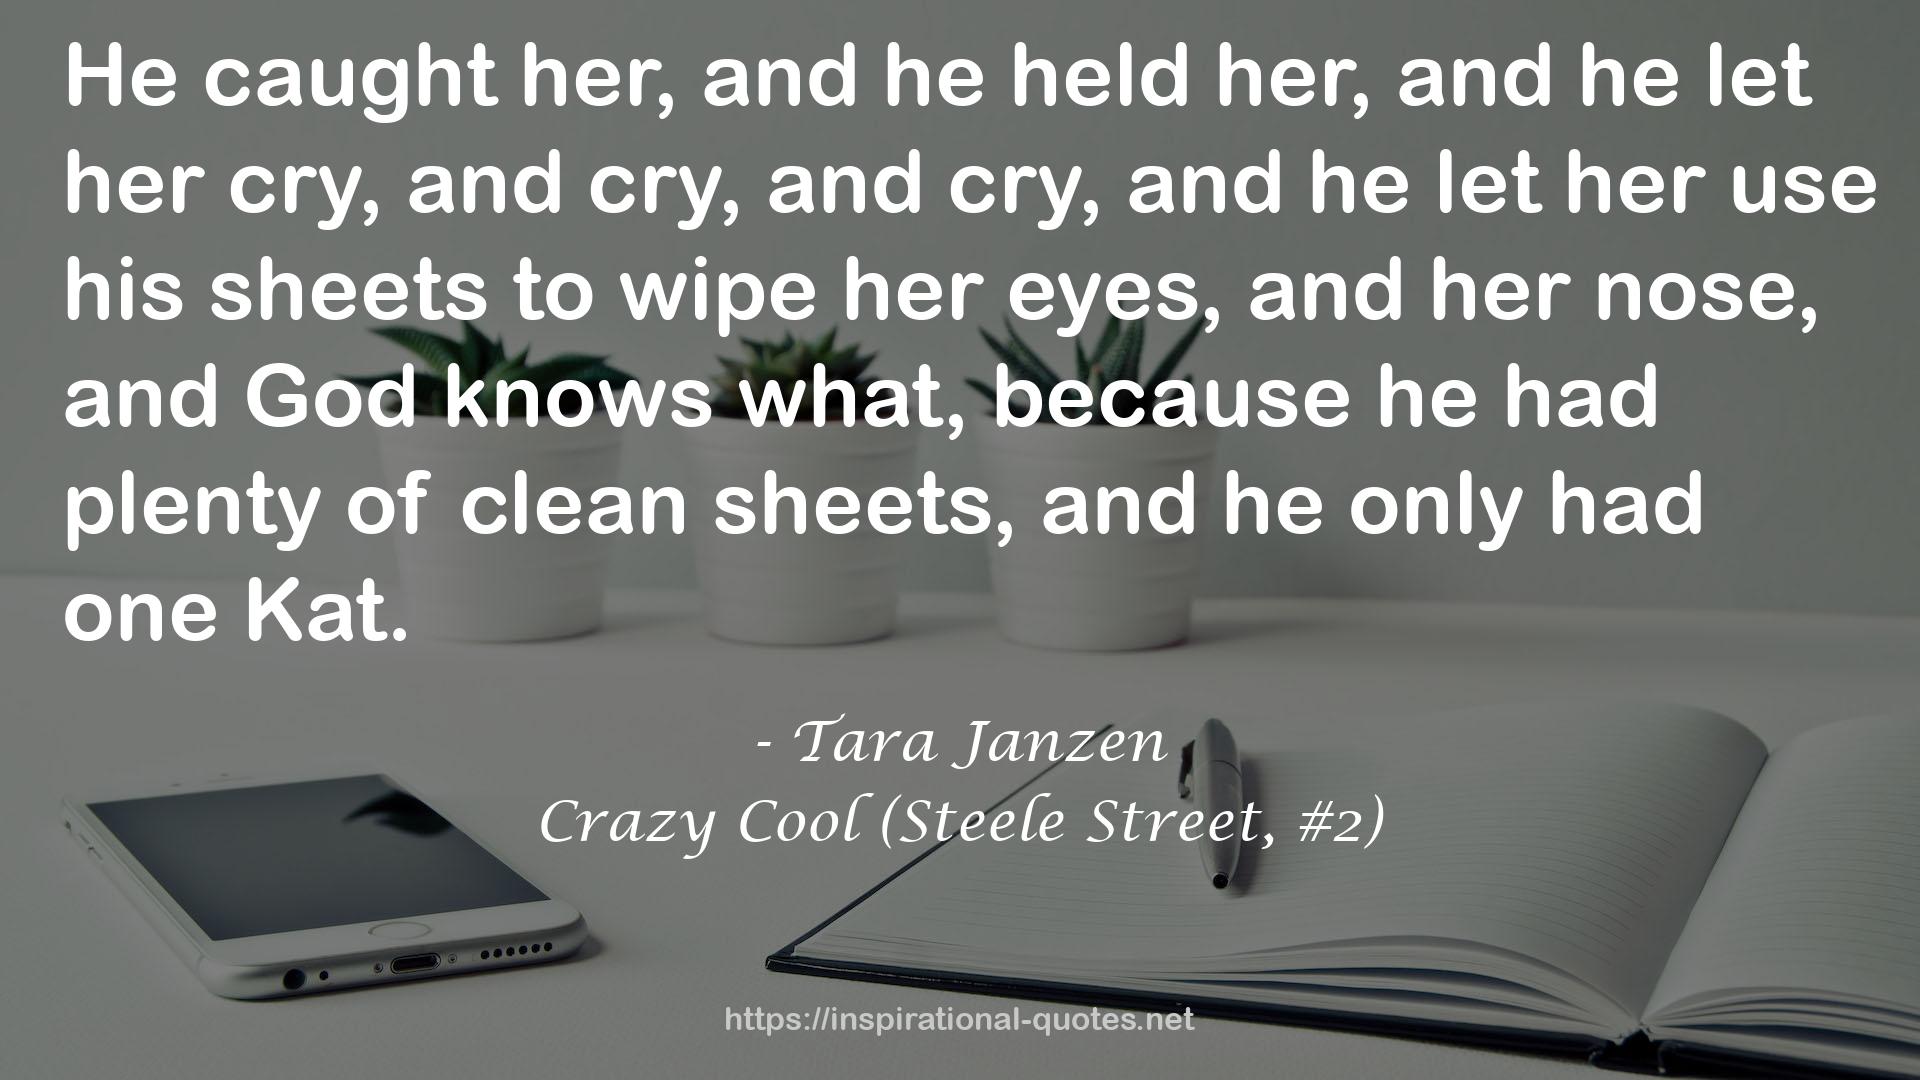 Crazy Cool (Steele Street, #2) QUOTES